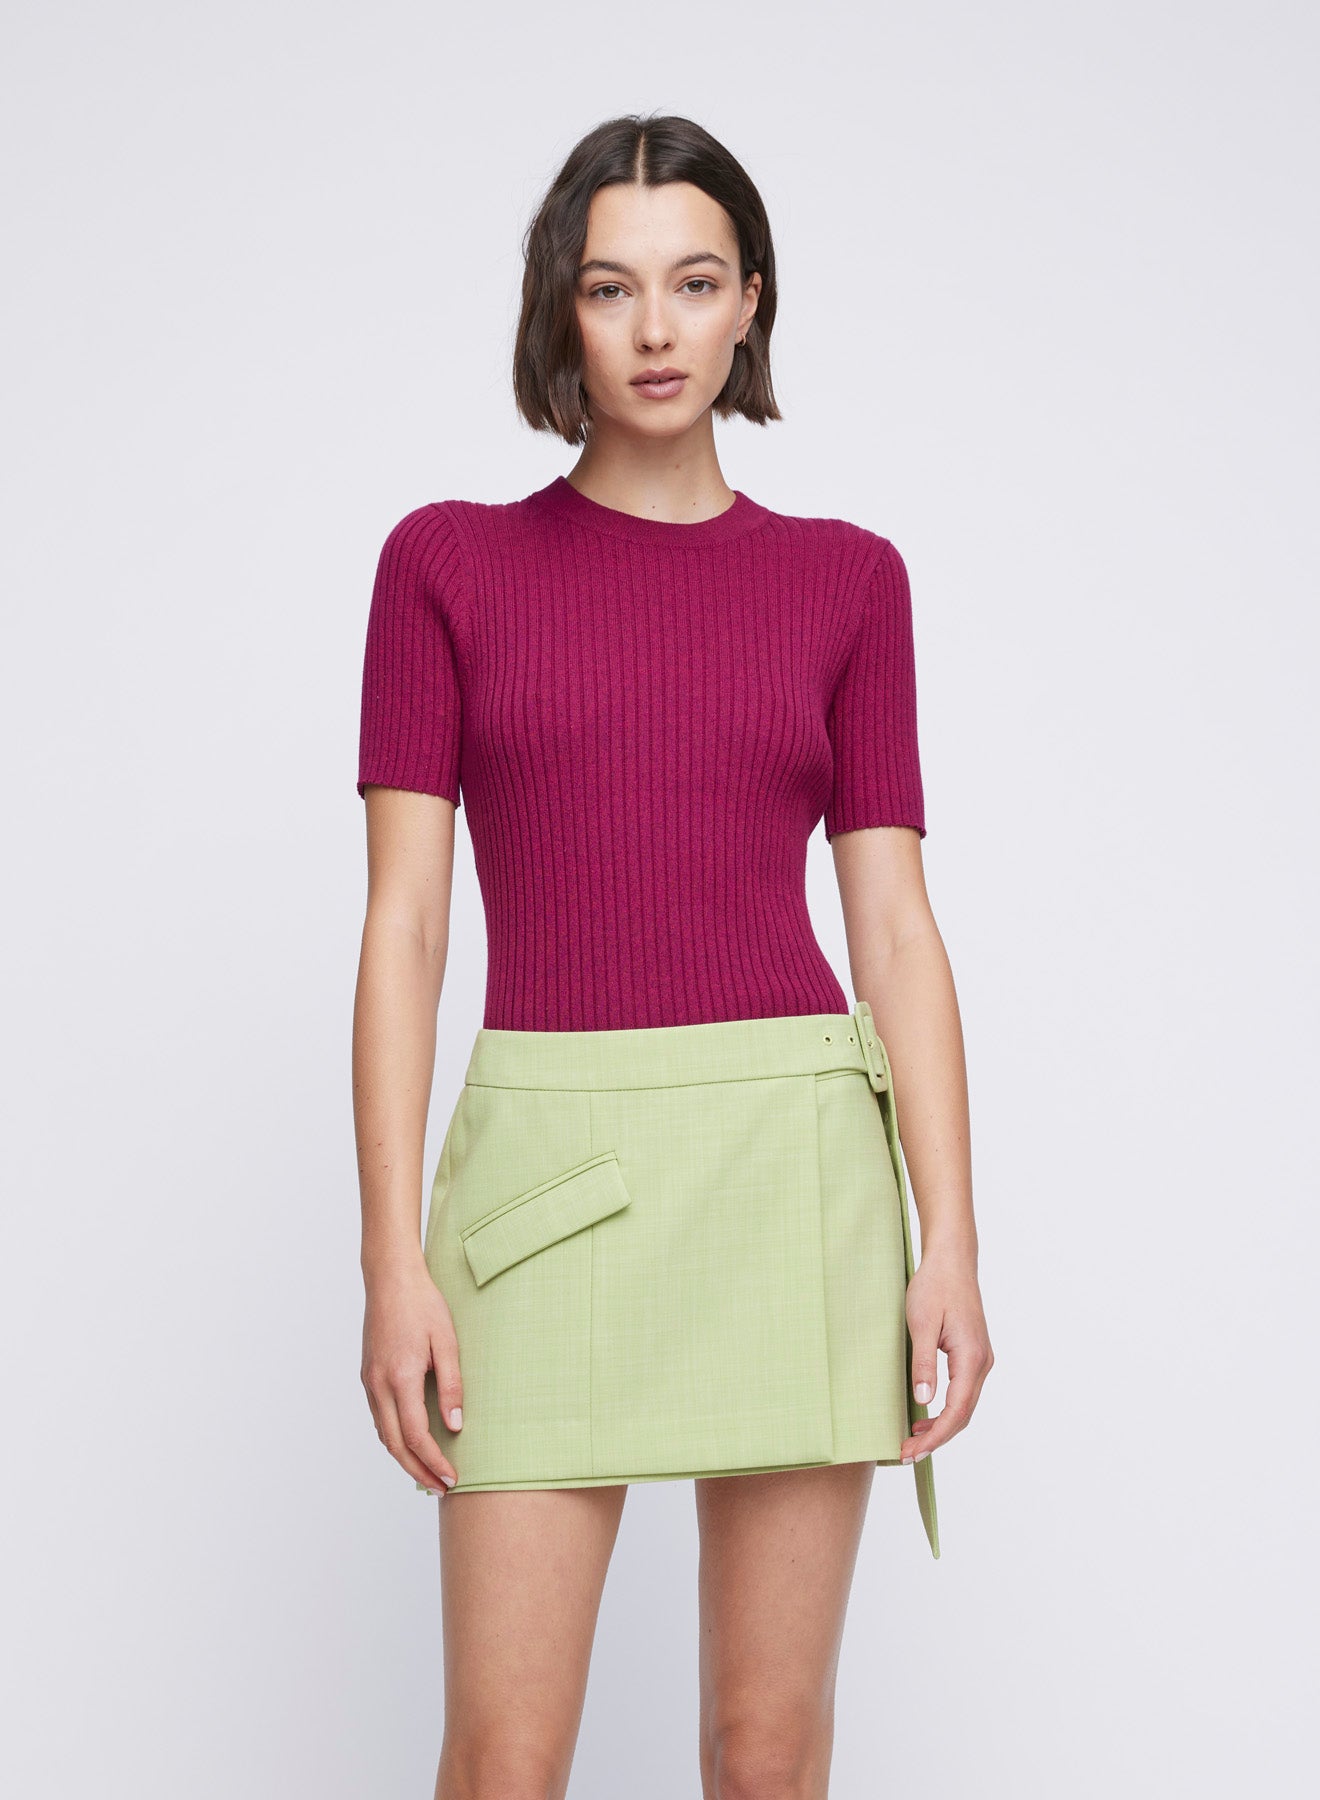 ANNA QUAN cotton rib knit crew neck top with marl texture. Short sleeve knit top, short sleeve top, short sleeve tee, every day knit tee, every day work knit top.